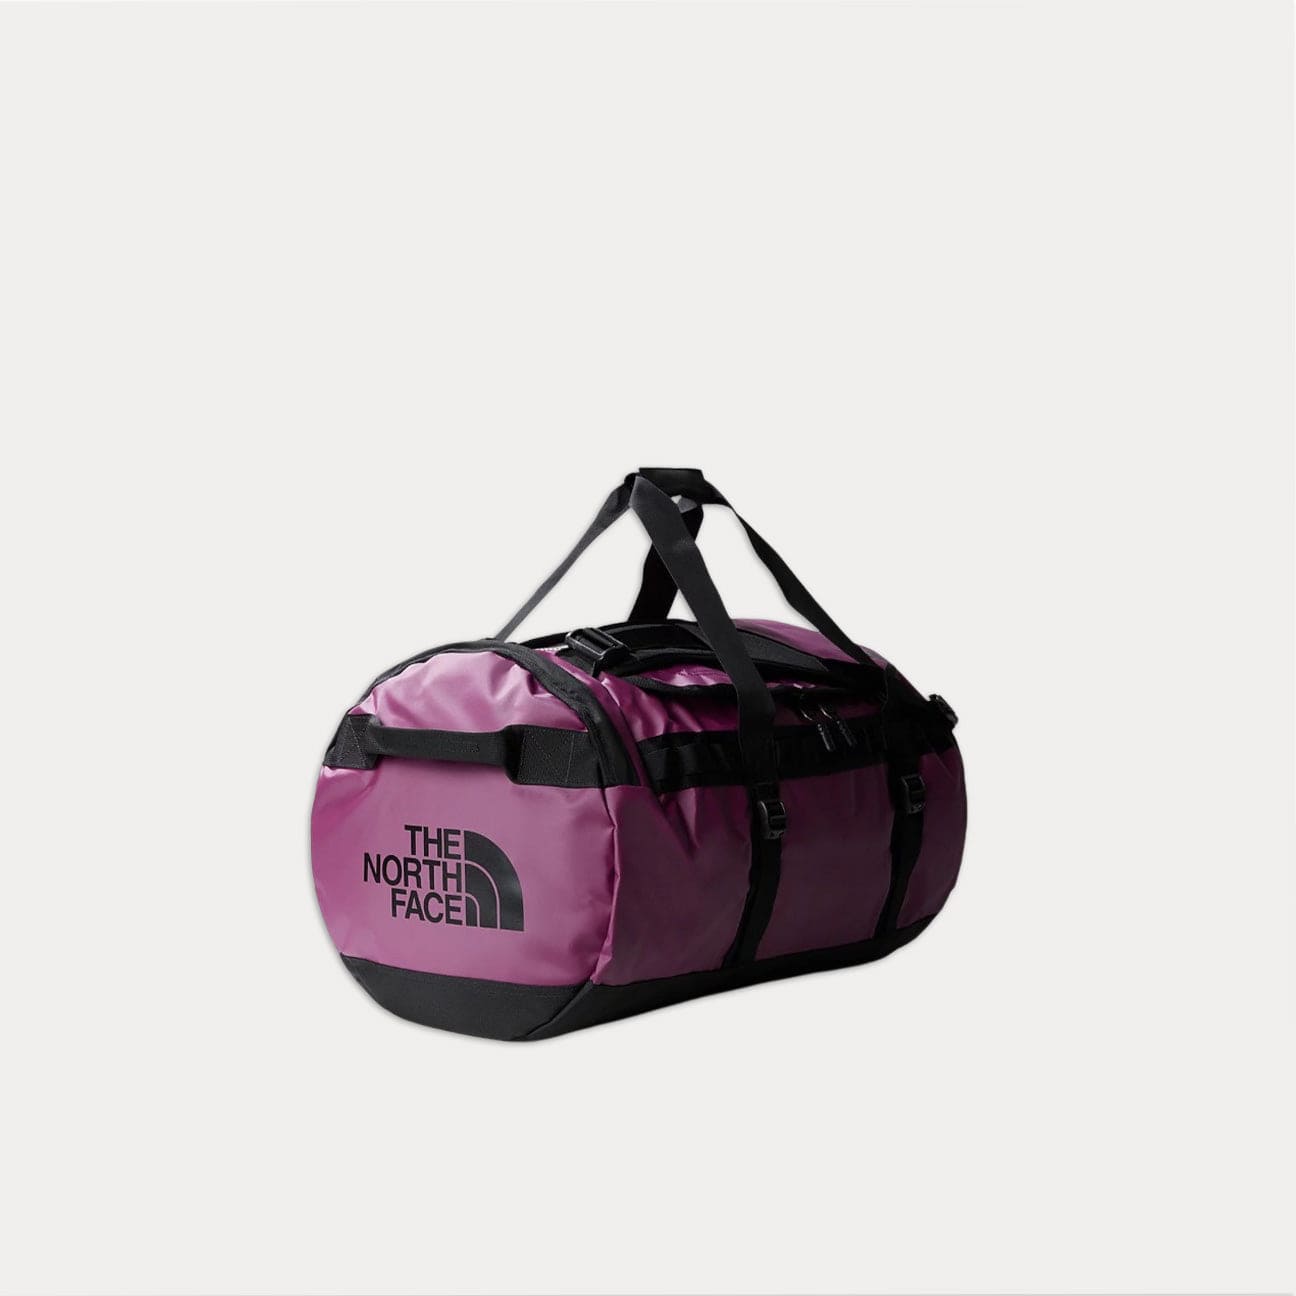 THE NORTH FACE Duffel Base Camp Small Boysenberry